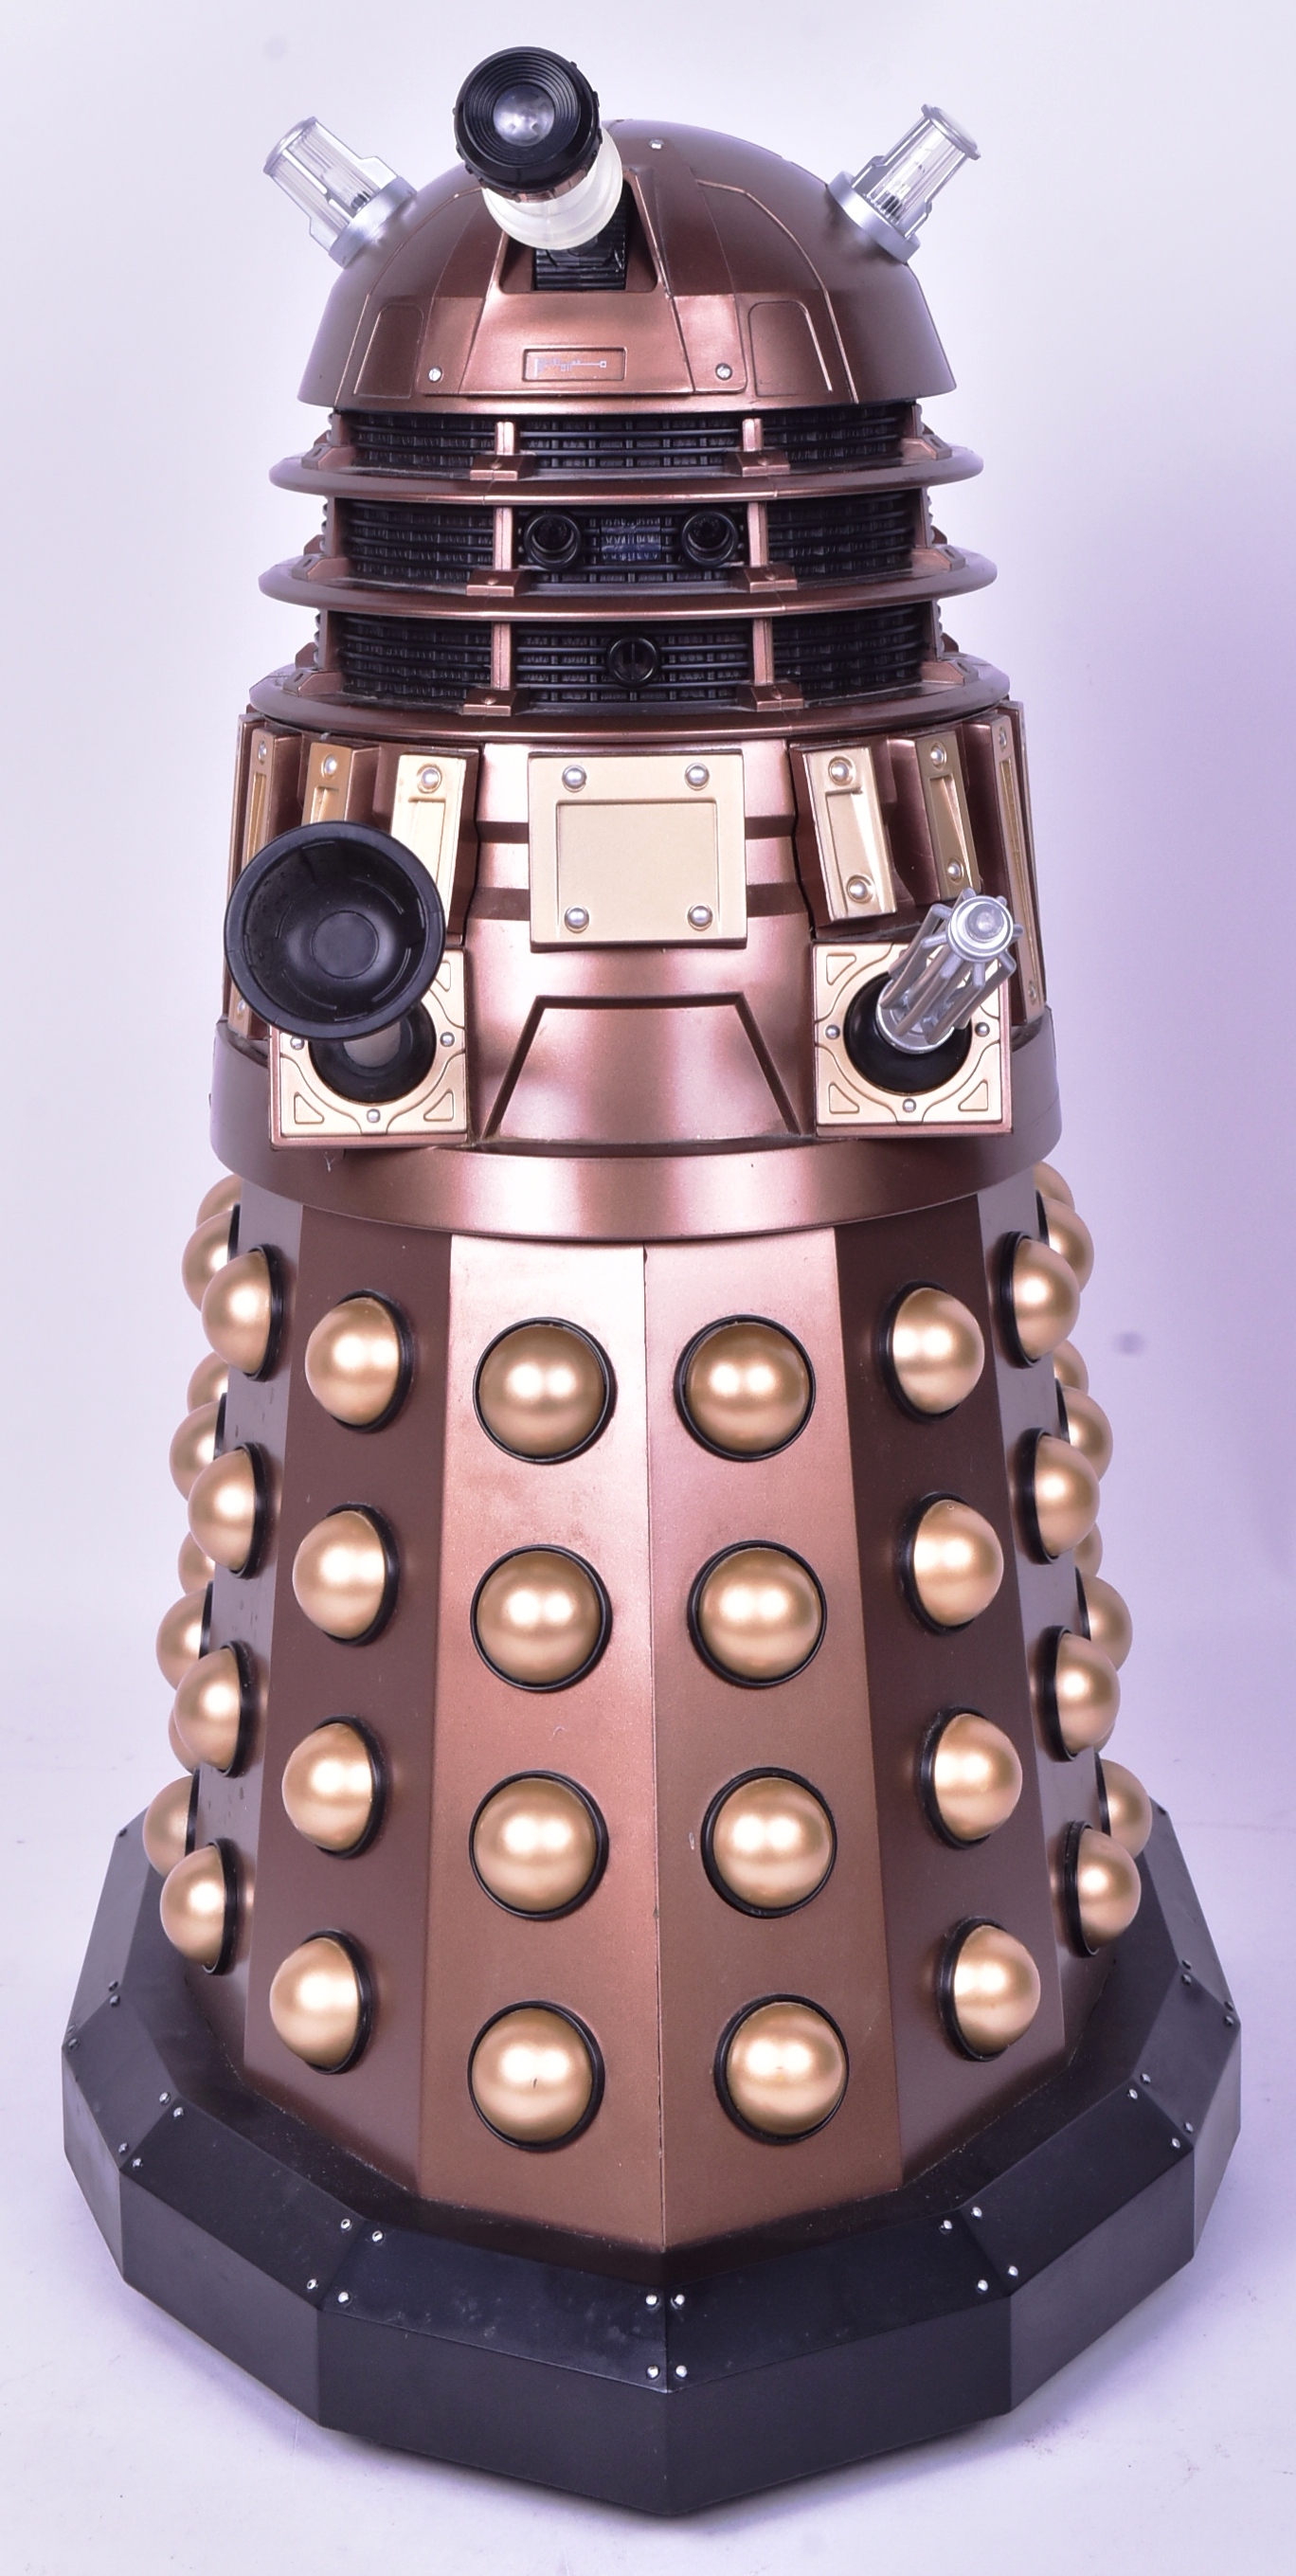 DOCTOR WHO - CHARACTER OPTONS - 18" SCALE LARGE RC DALEK - Image 2 of 5